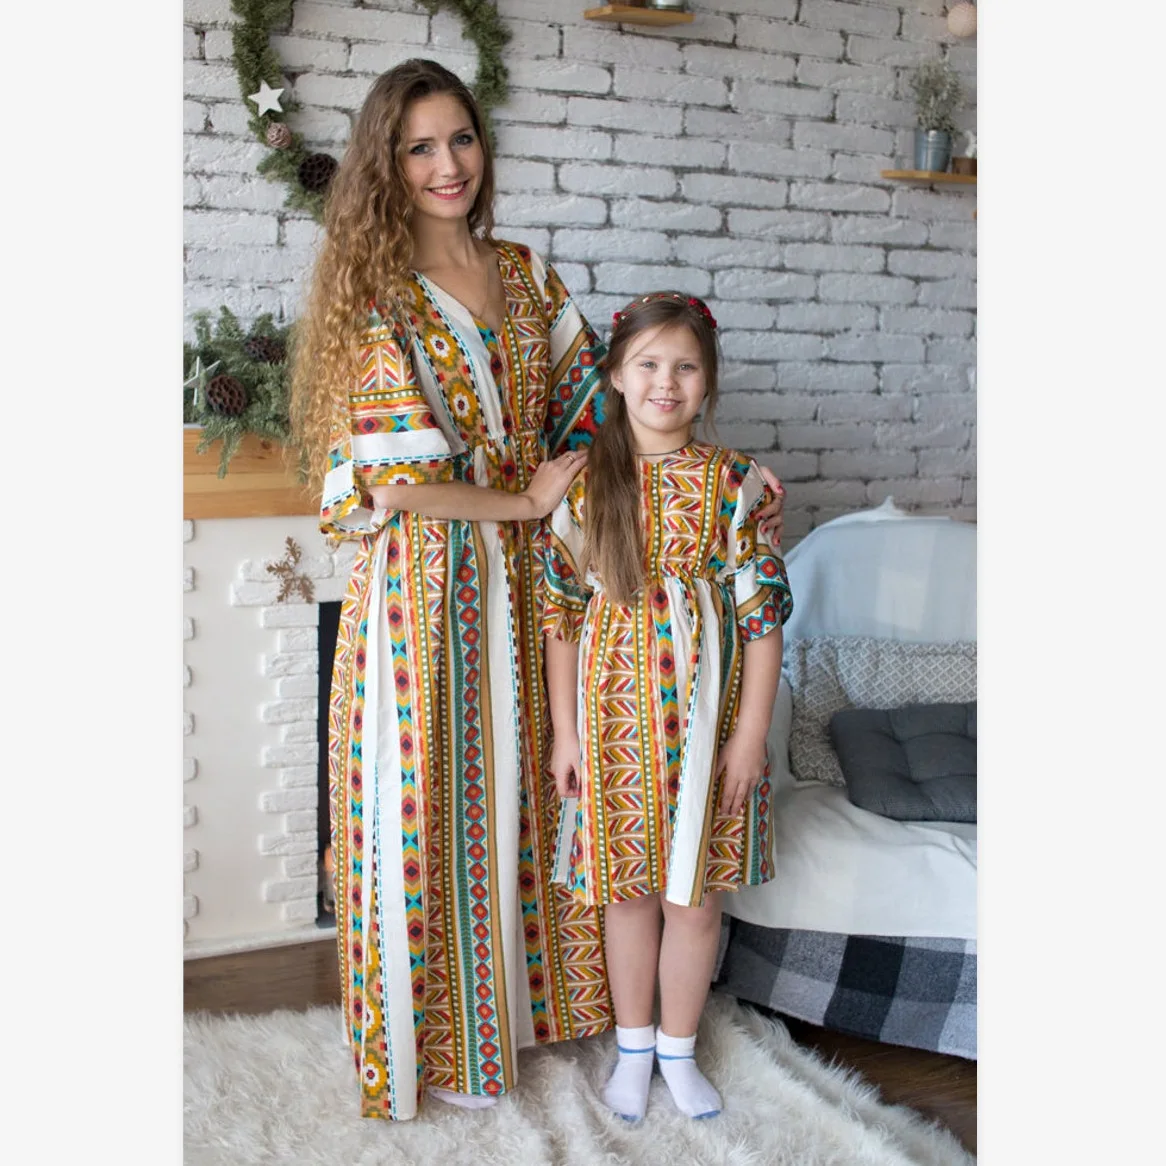 

MM-002 new fashion bohemia floral print maxi long dress designs for mommy and me boutique kids short sleeve dress, Light blue , navy